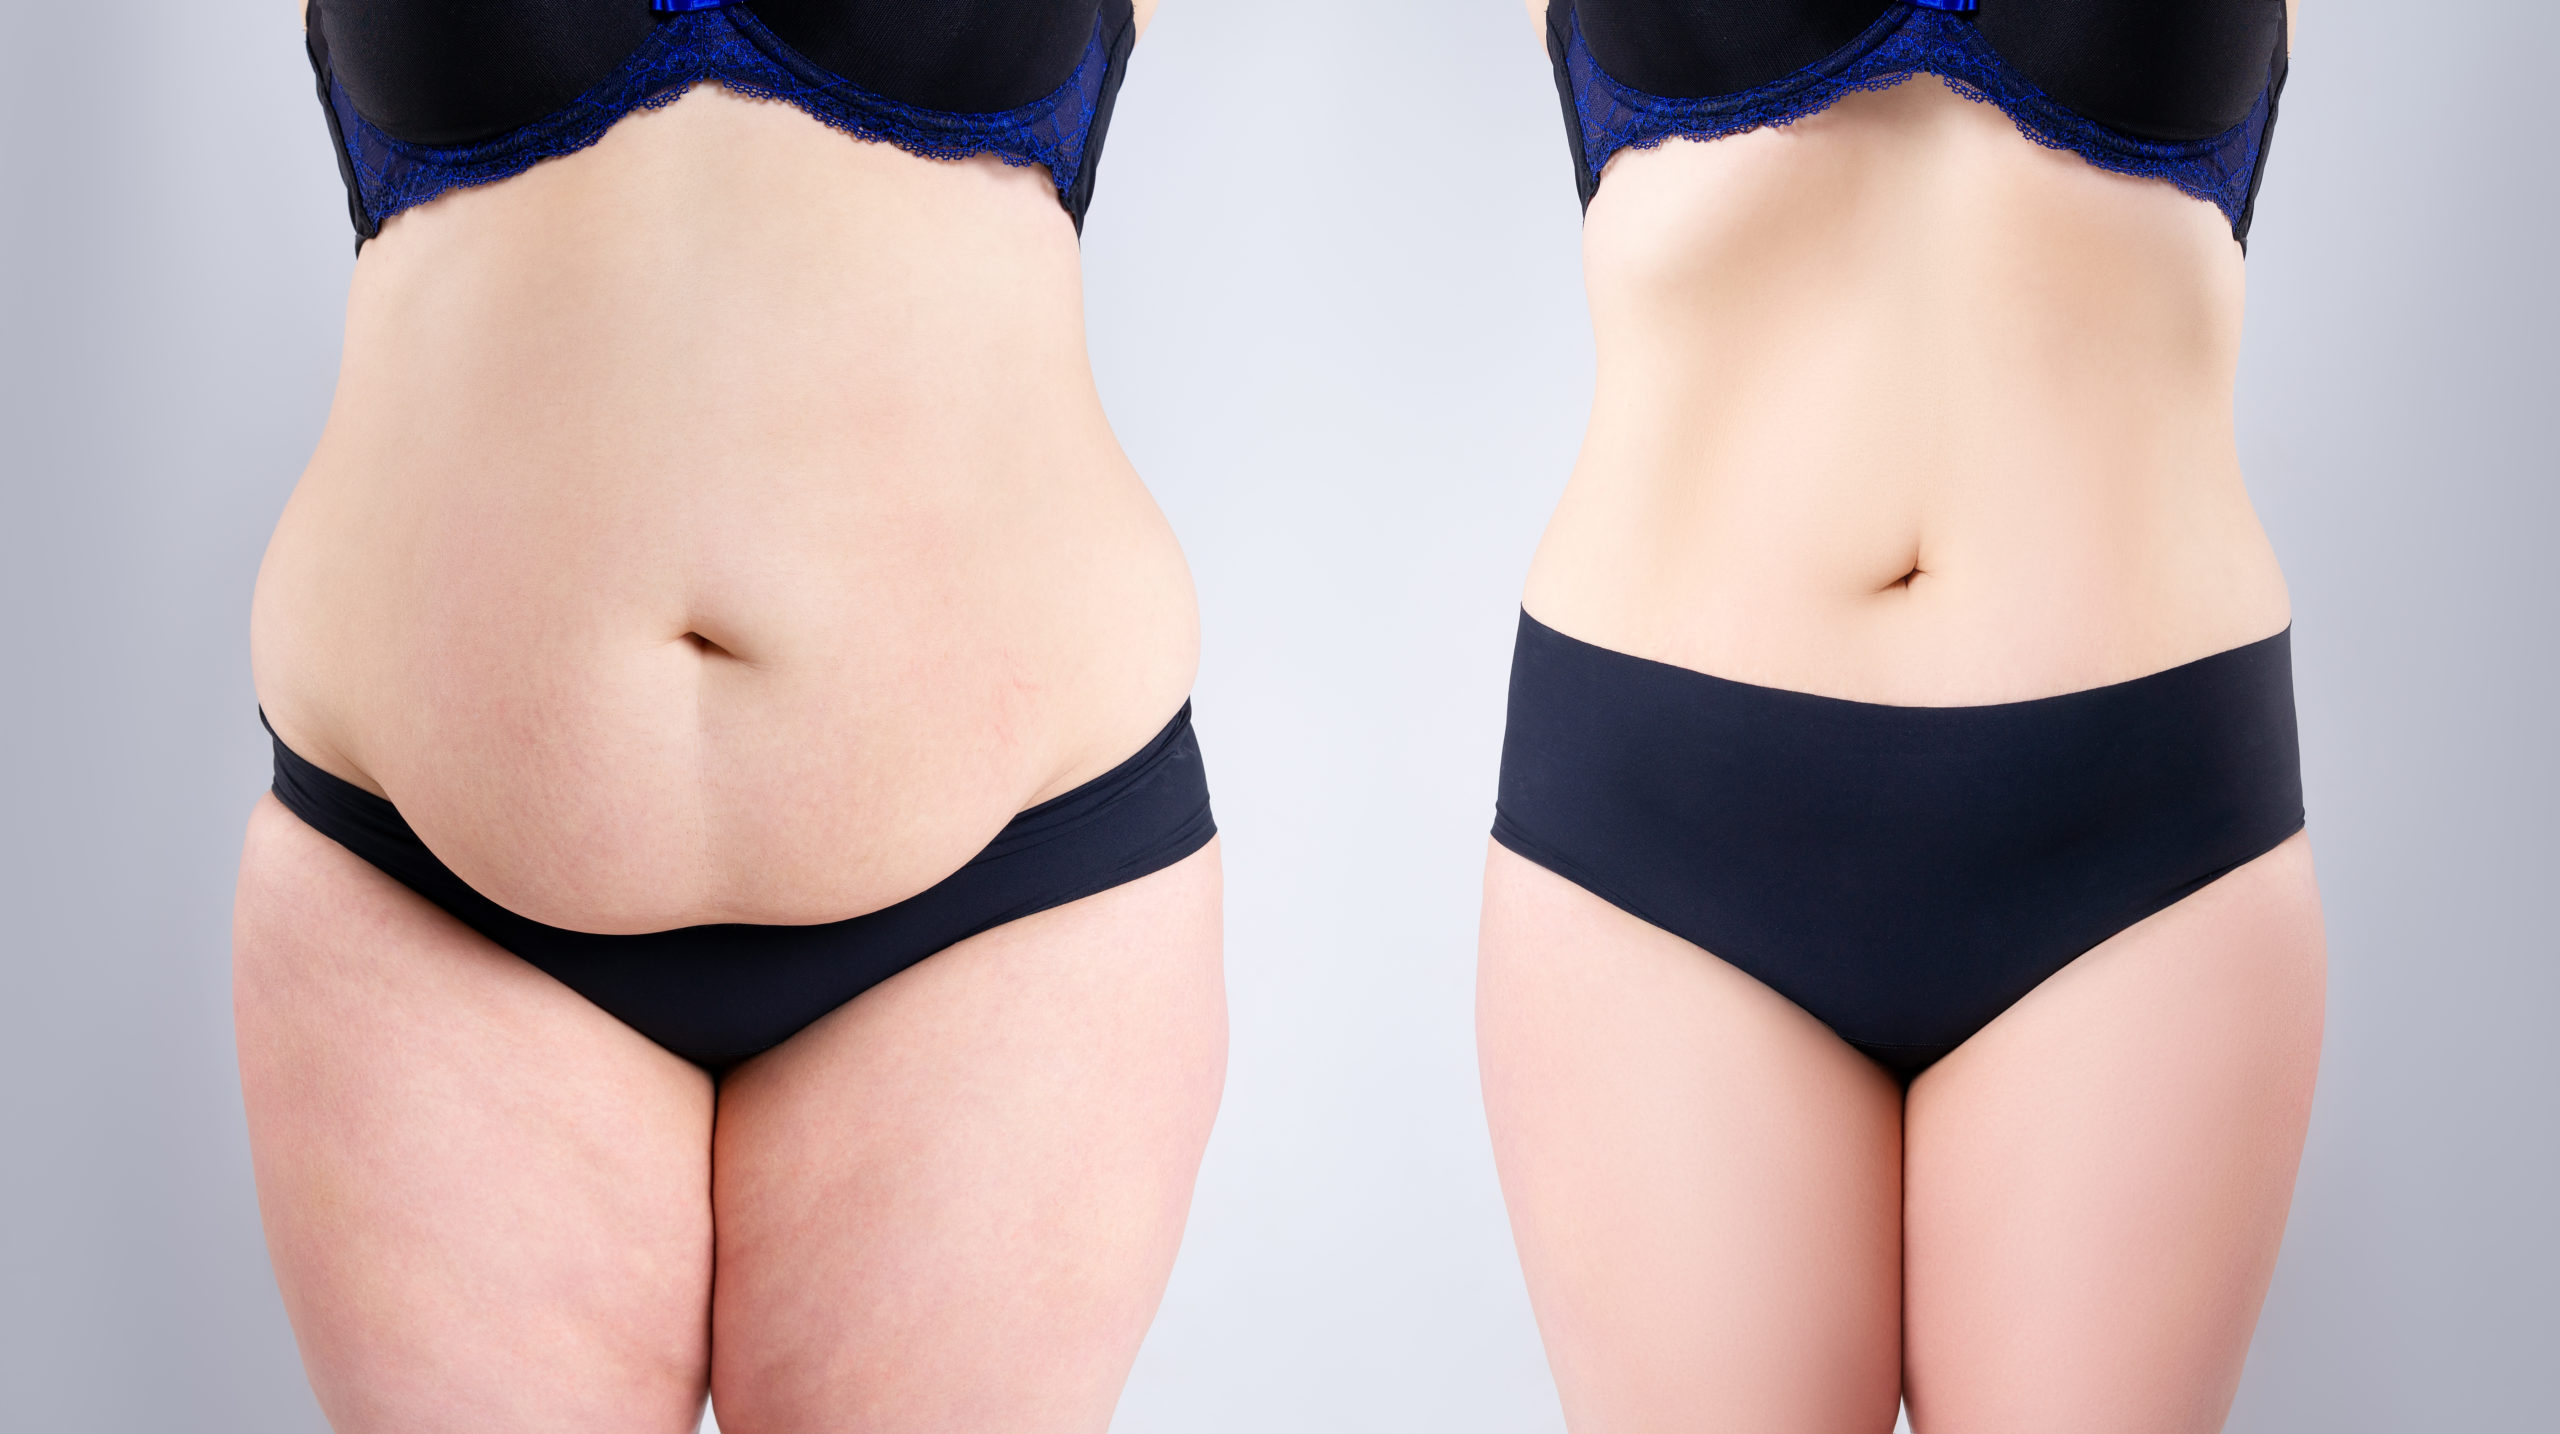 How Can Body Contouring Help Me Post-Weight Loss?